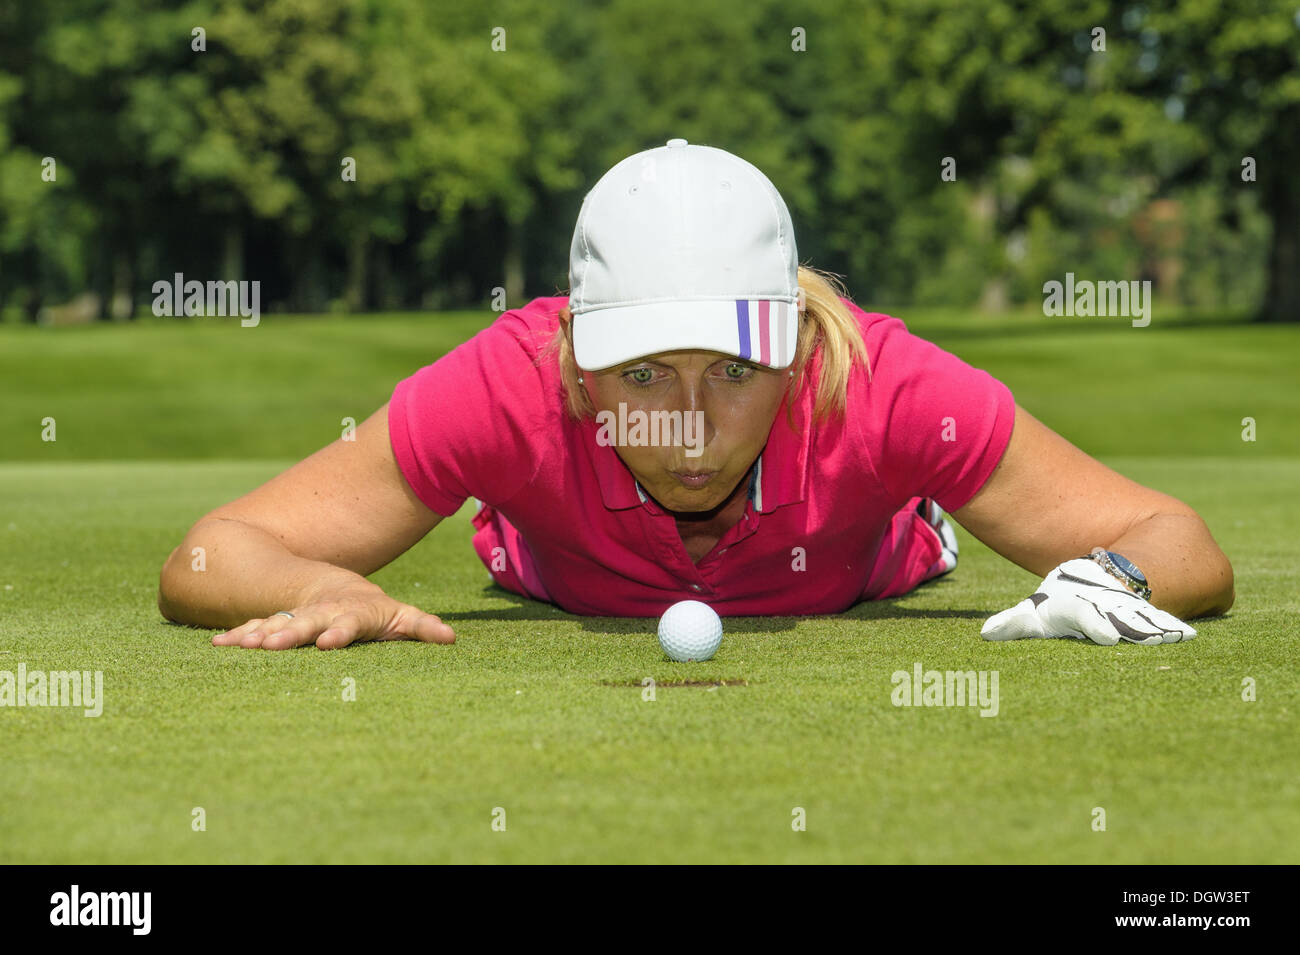 Golfer blowing golf ball into hole Stock Photo